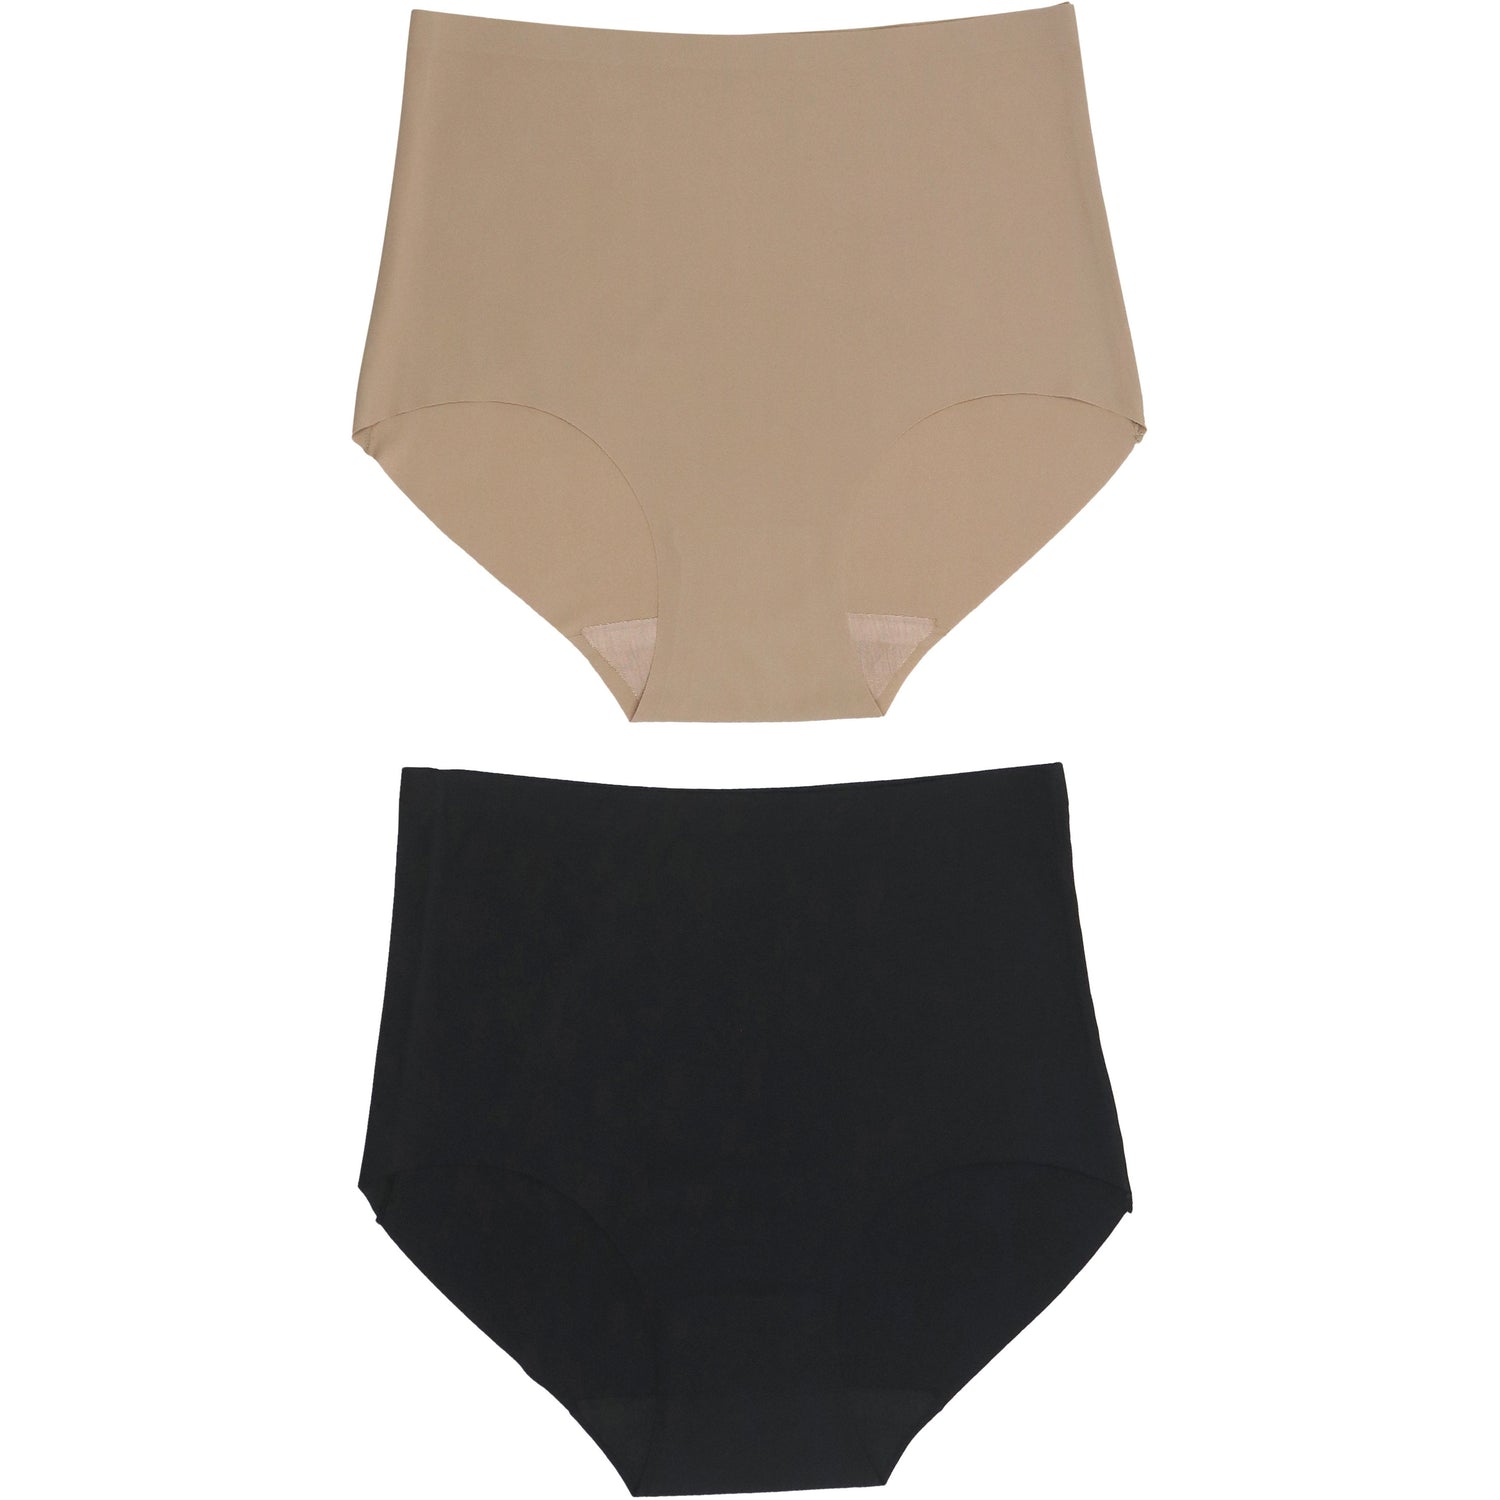 HI-WAIST FIRM CONTROL LASER CUT NO PANTY LINES SHAPING BRIEFS by NAUTICA -  2pc